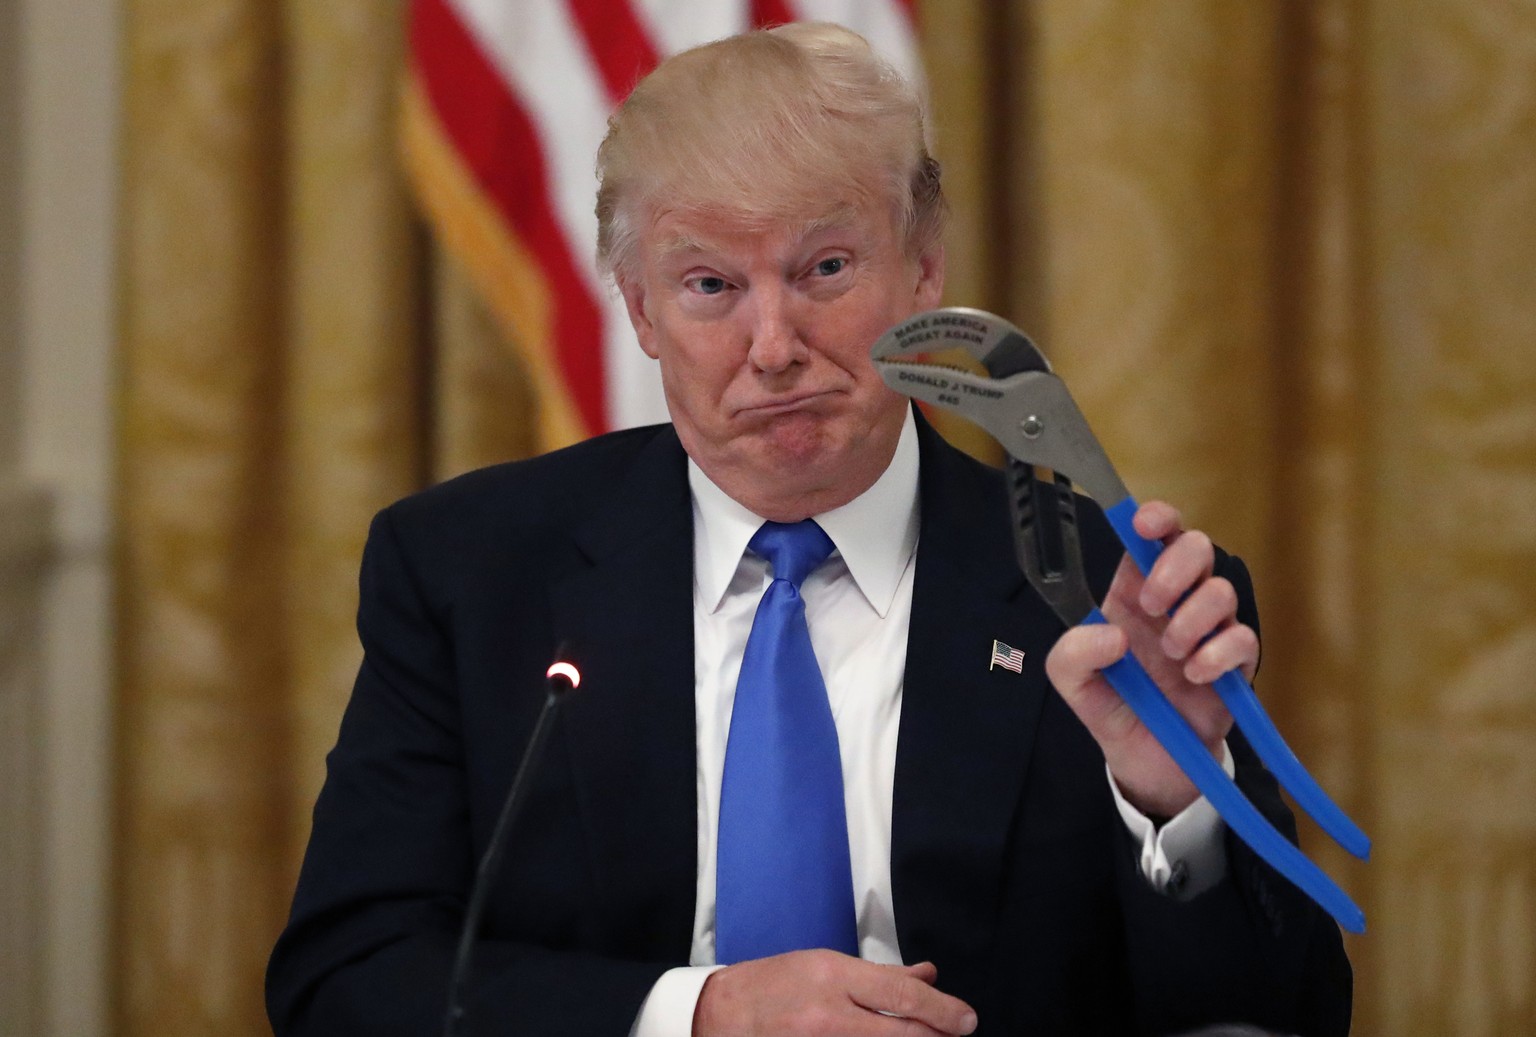 President Donald Trump holds up a Channellock locking plier during a &quot;Made in America,&quot; roundtable event in the East Room of the White House in Washington, Wednesday, July 19, 2017. (AP Phot ...